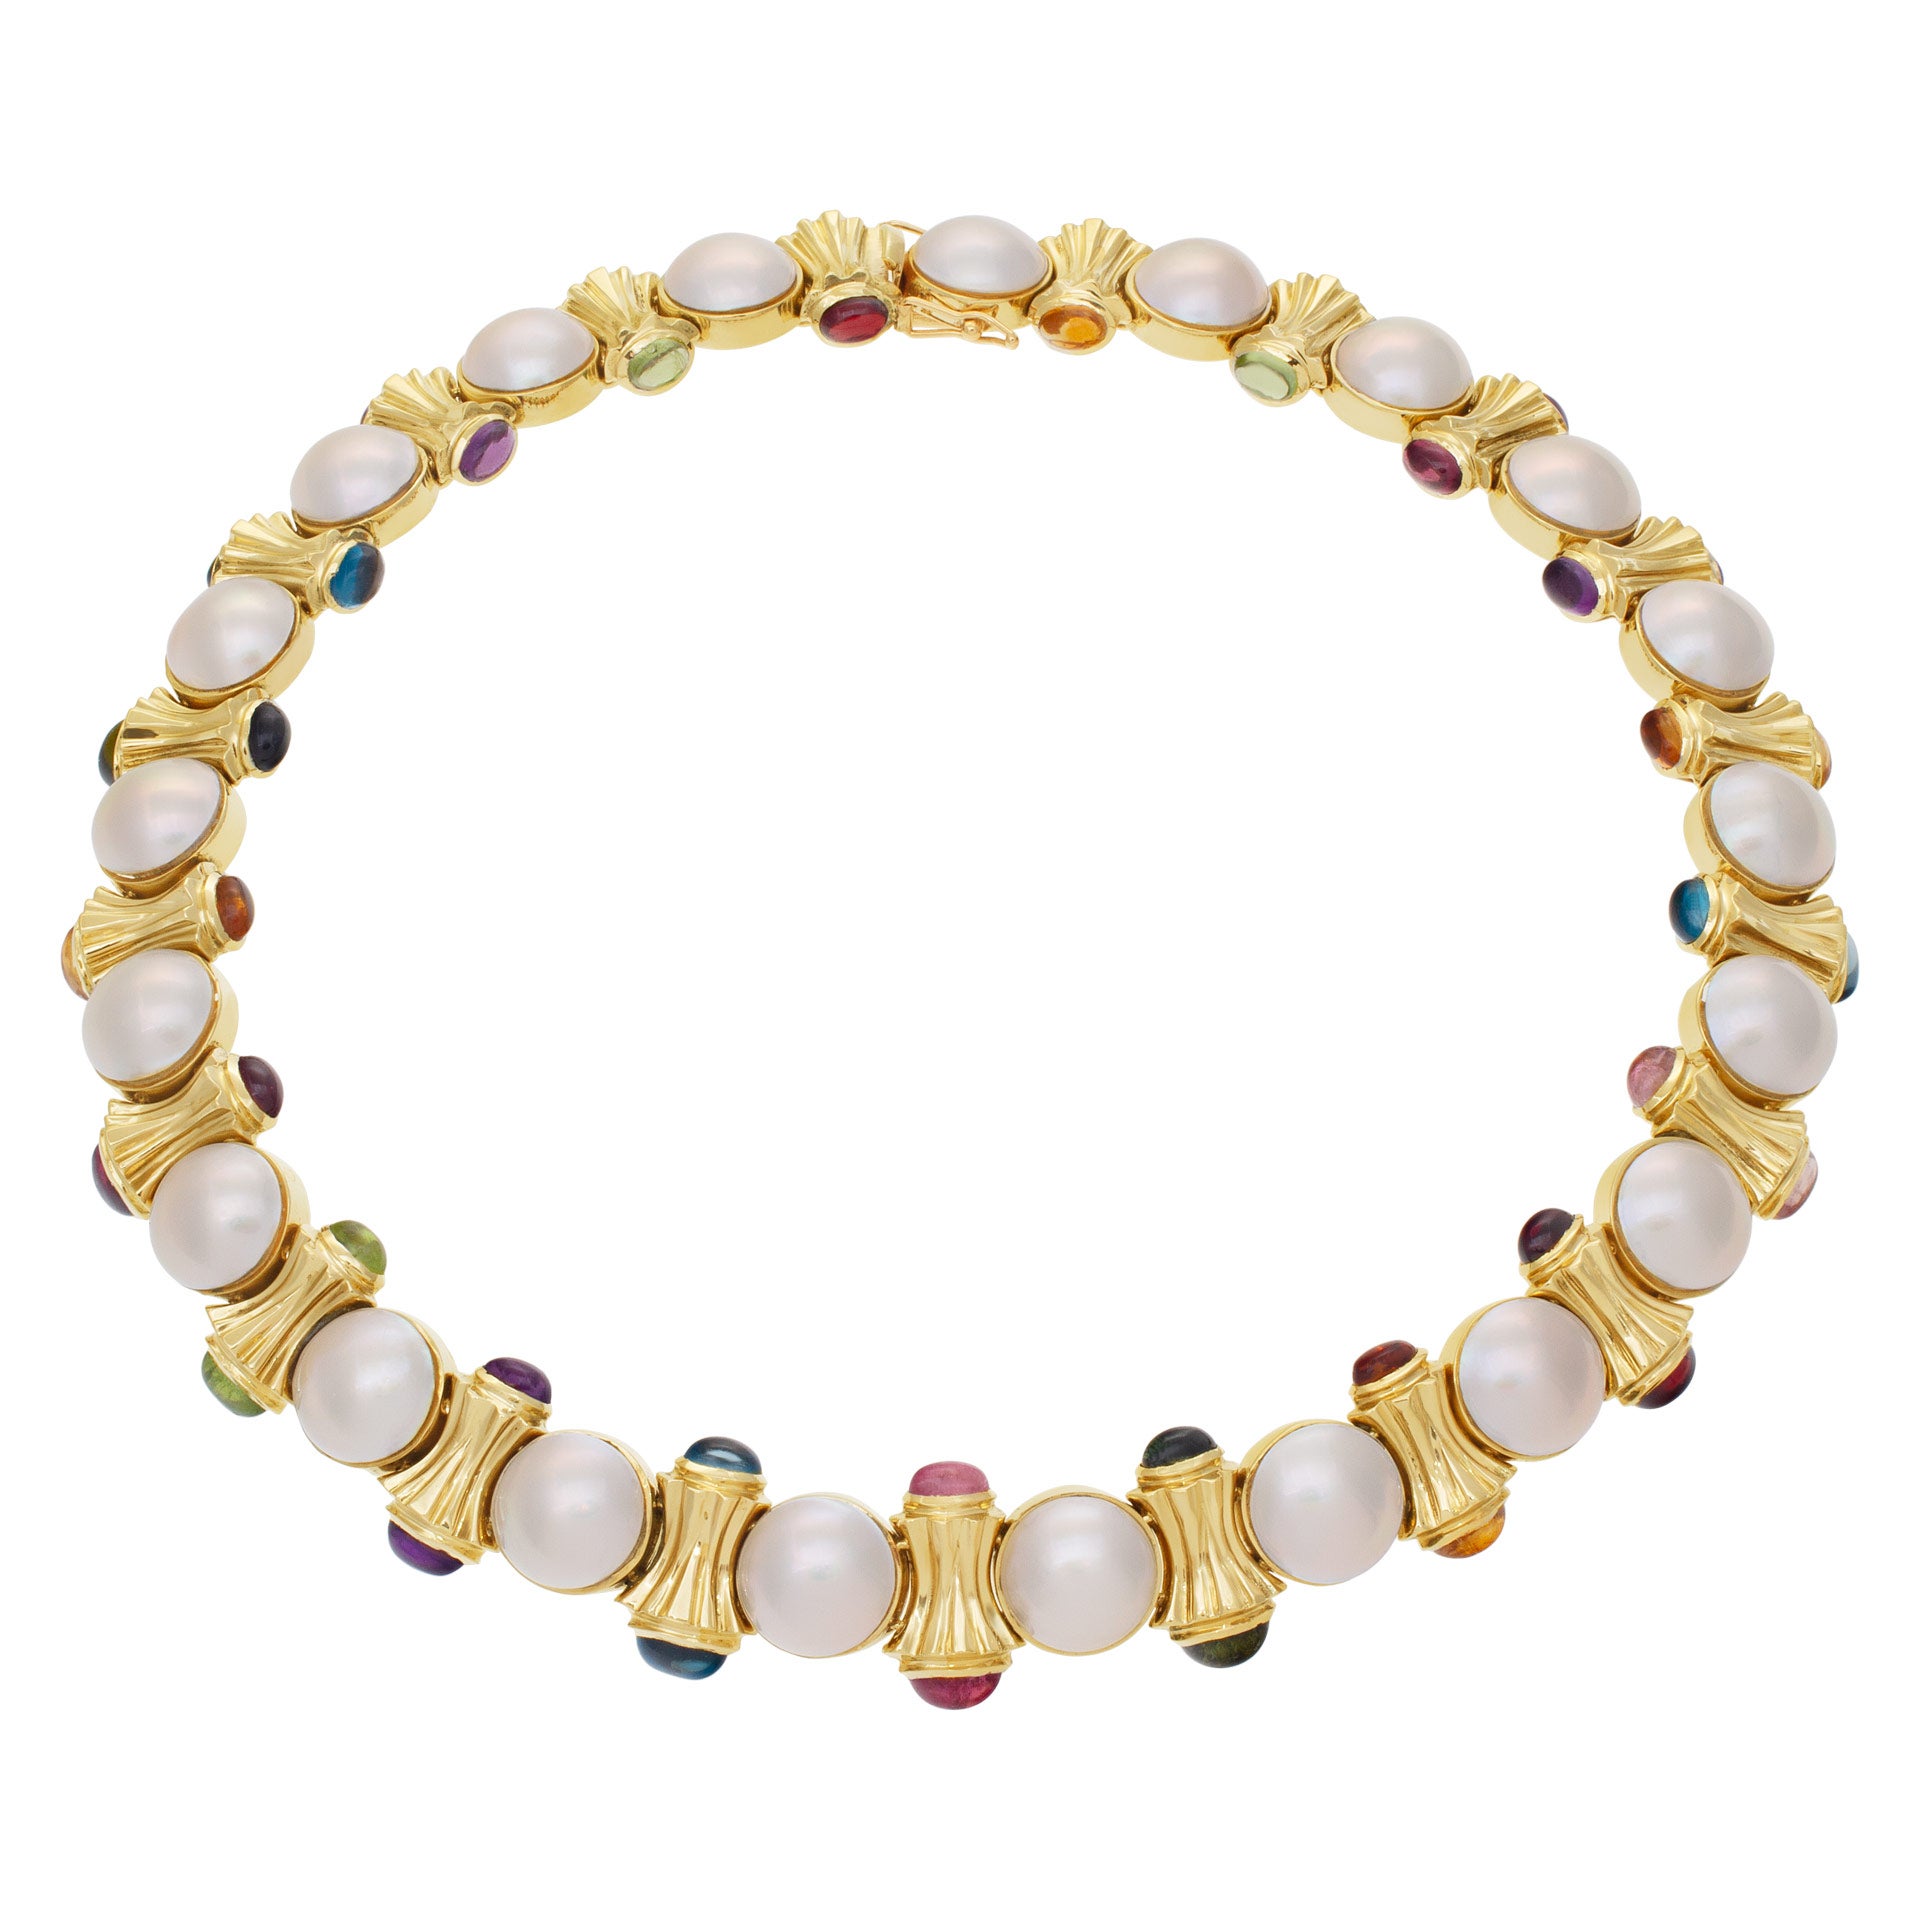 Necklace with Mabe Pearls and Cabochon Stone in 14k Yellow Gold